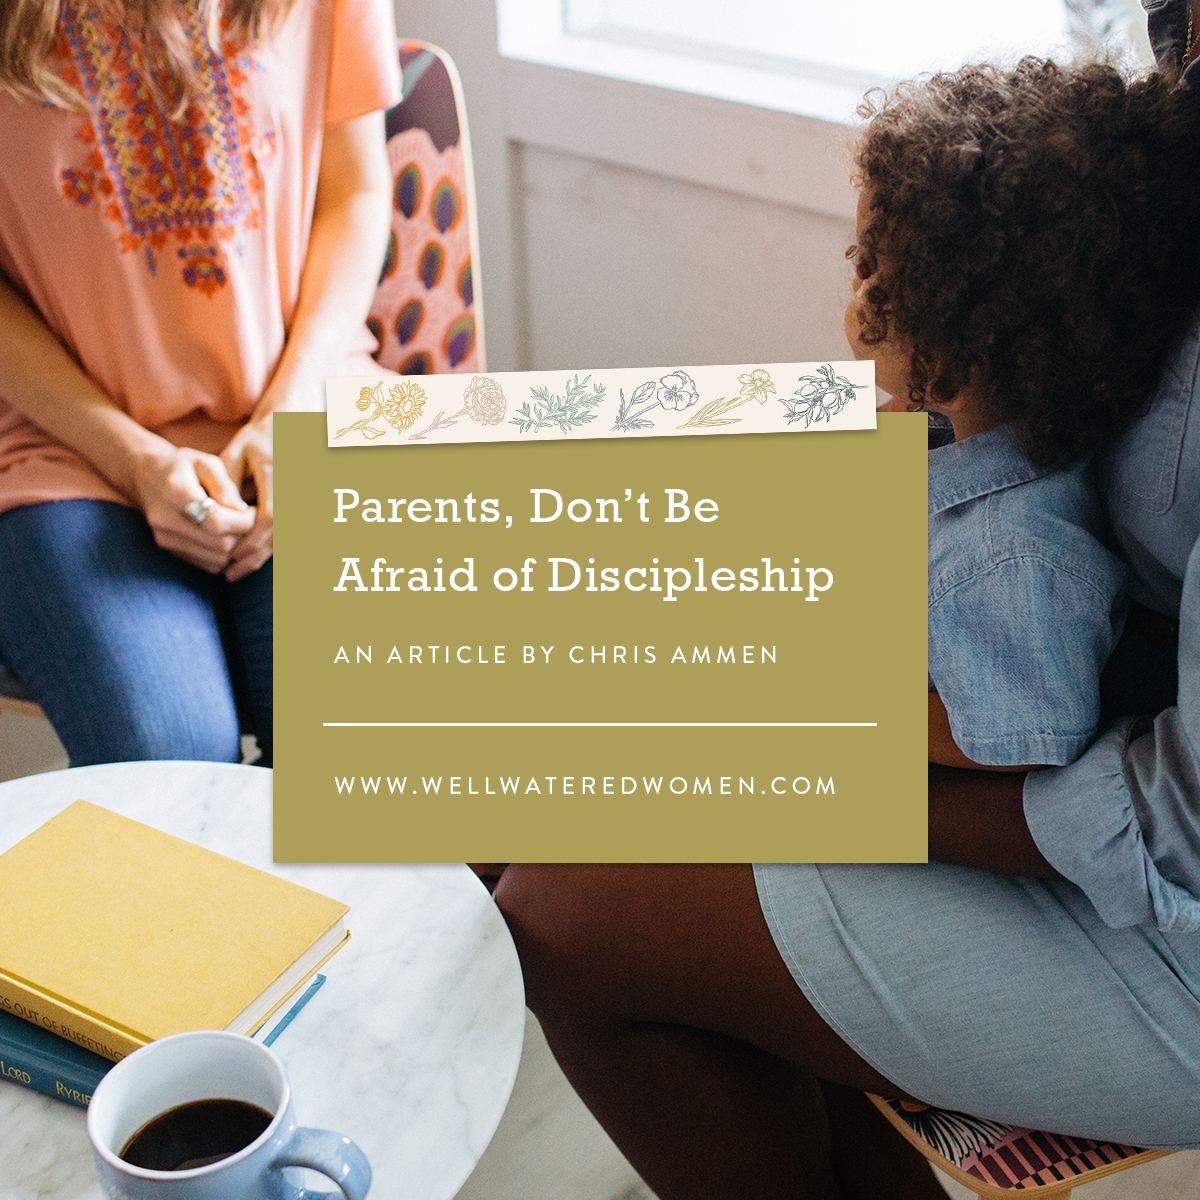 Parents, Don't Be Afraid of Discipleship - an article from Well-Watered Women